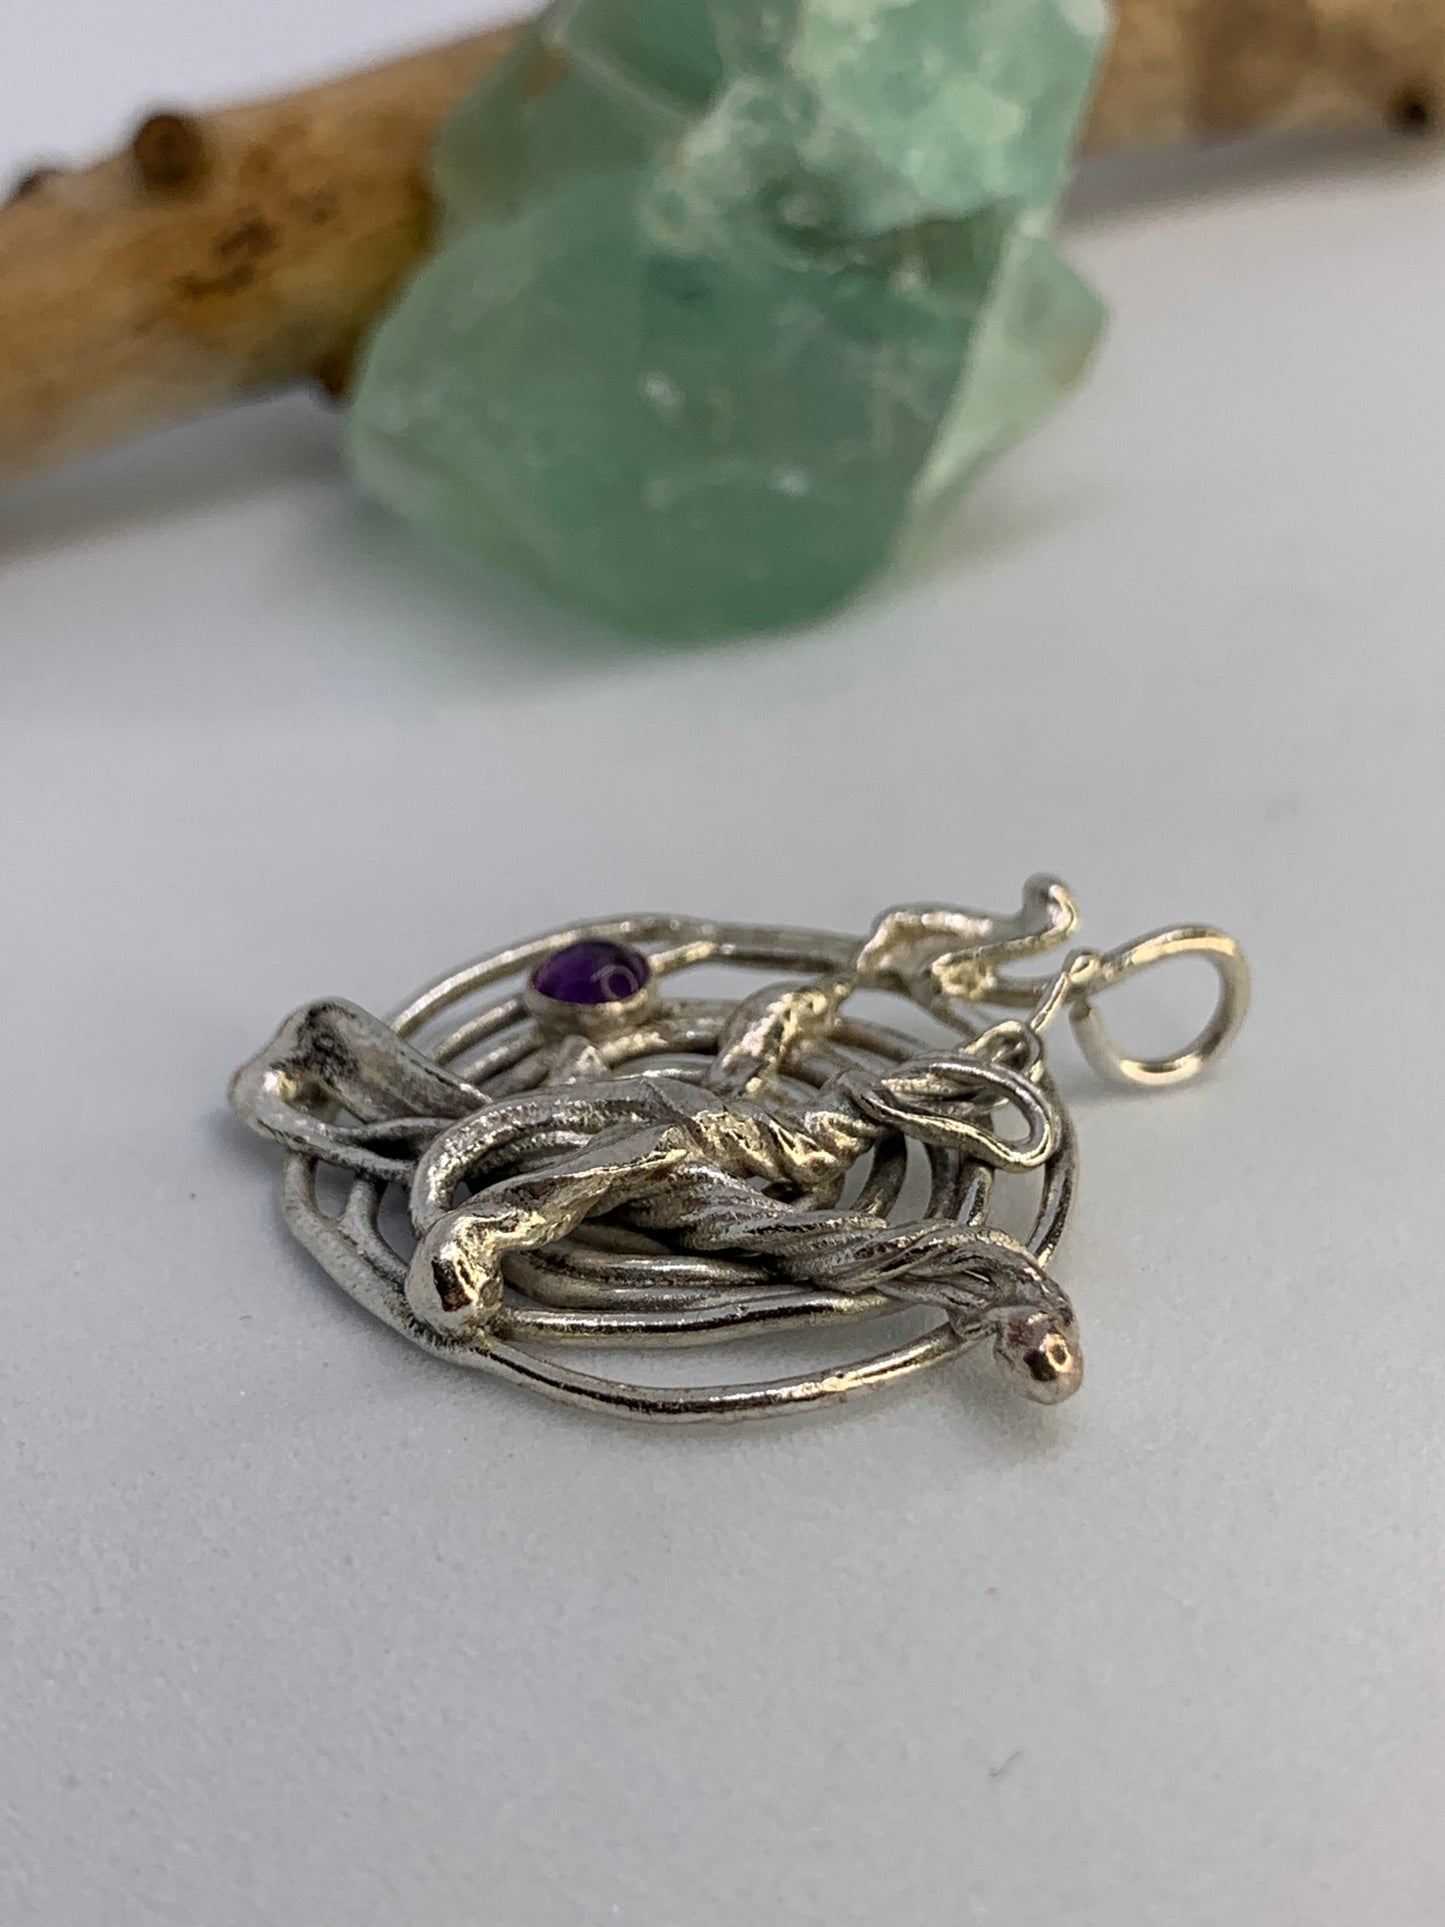 Spiral Abstract Amethyst Sterling Silver Pendant